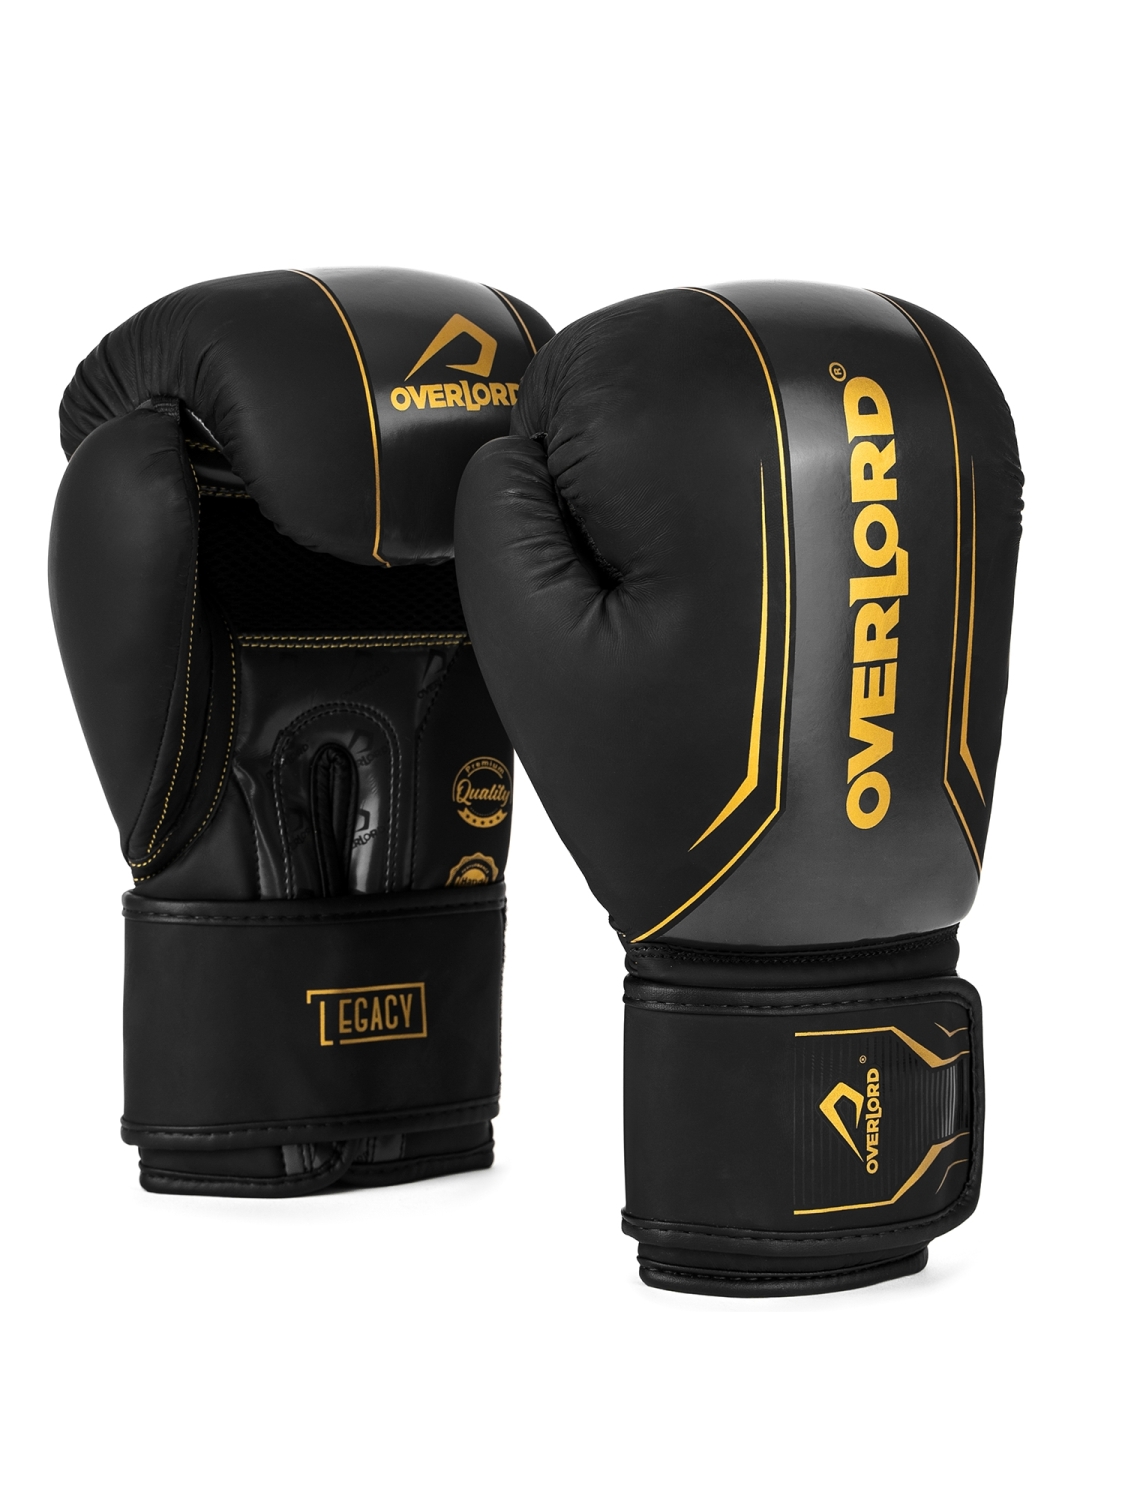 Overlord Boxing Gloves Legacy